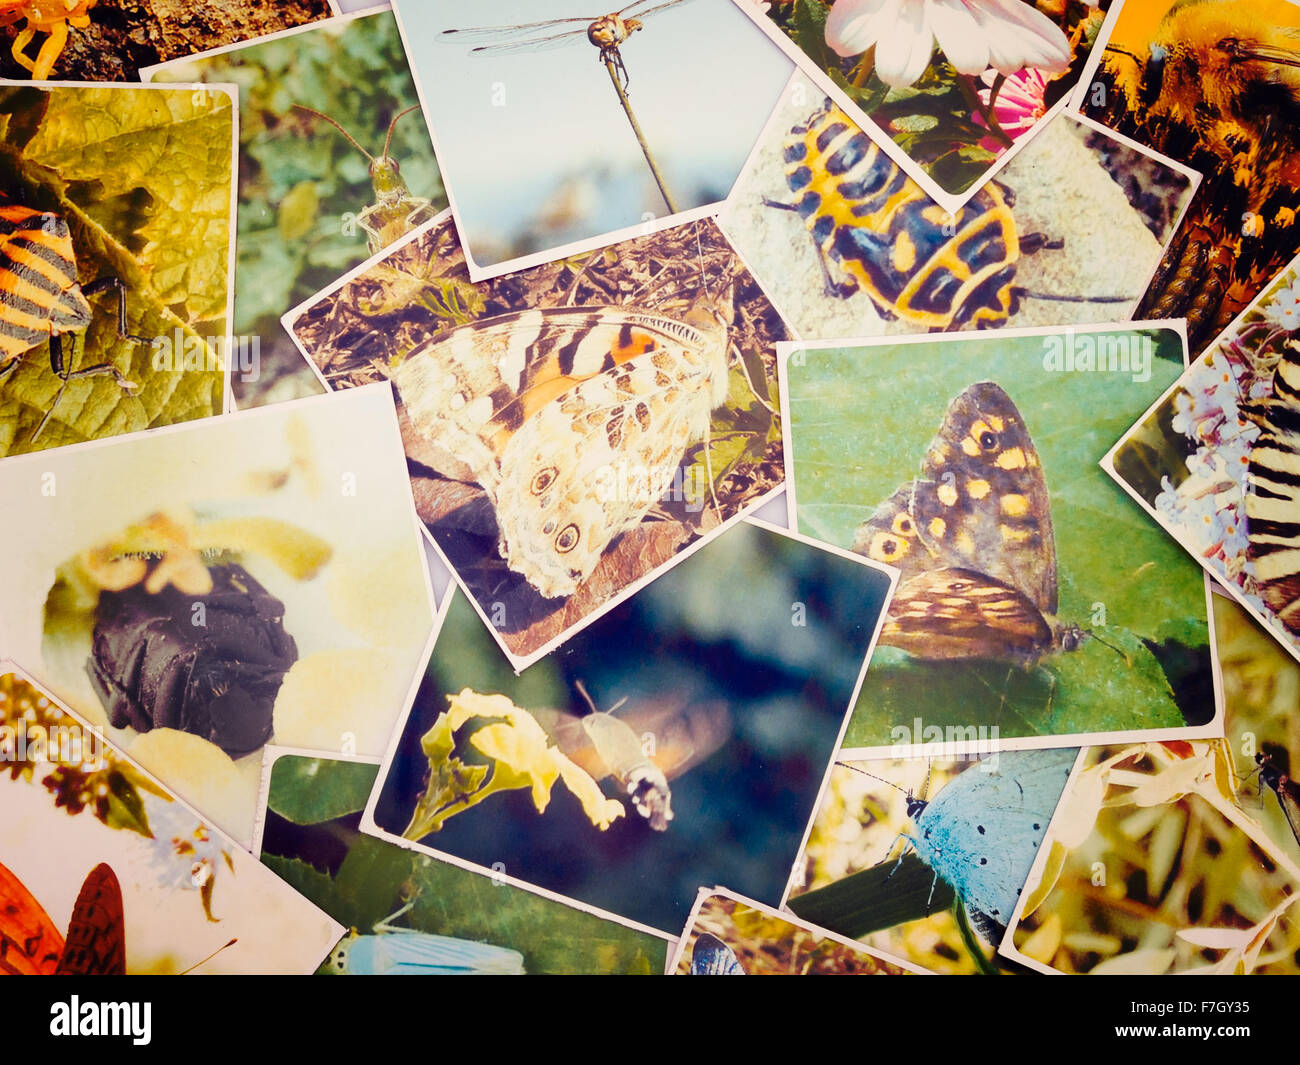 Macro, nature photography collage of real photos. Filtered retro image. Stock Photo